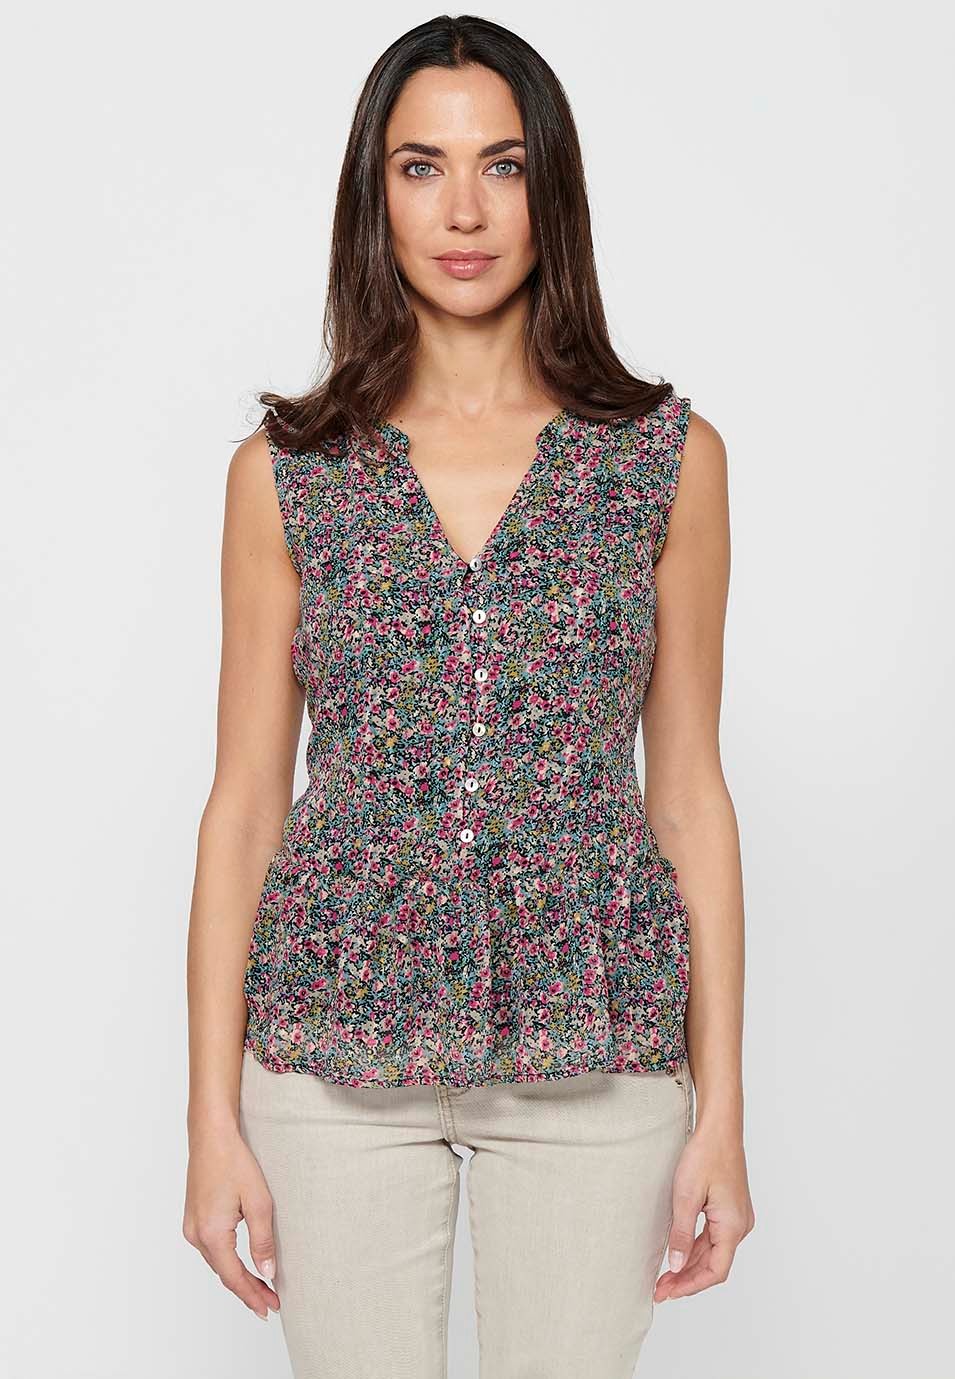 Sleeveless blouse with V-neck and floral print with ruffle finish and front button details in Multicolor for Women 4